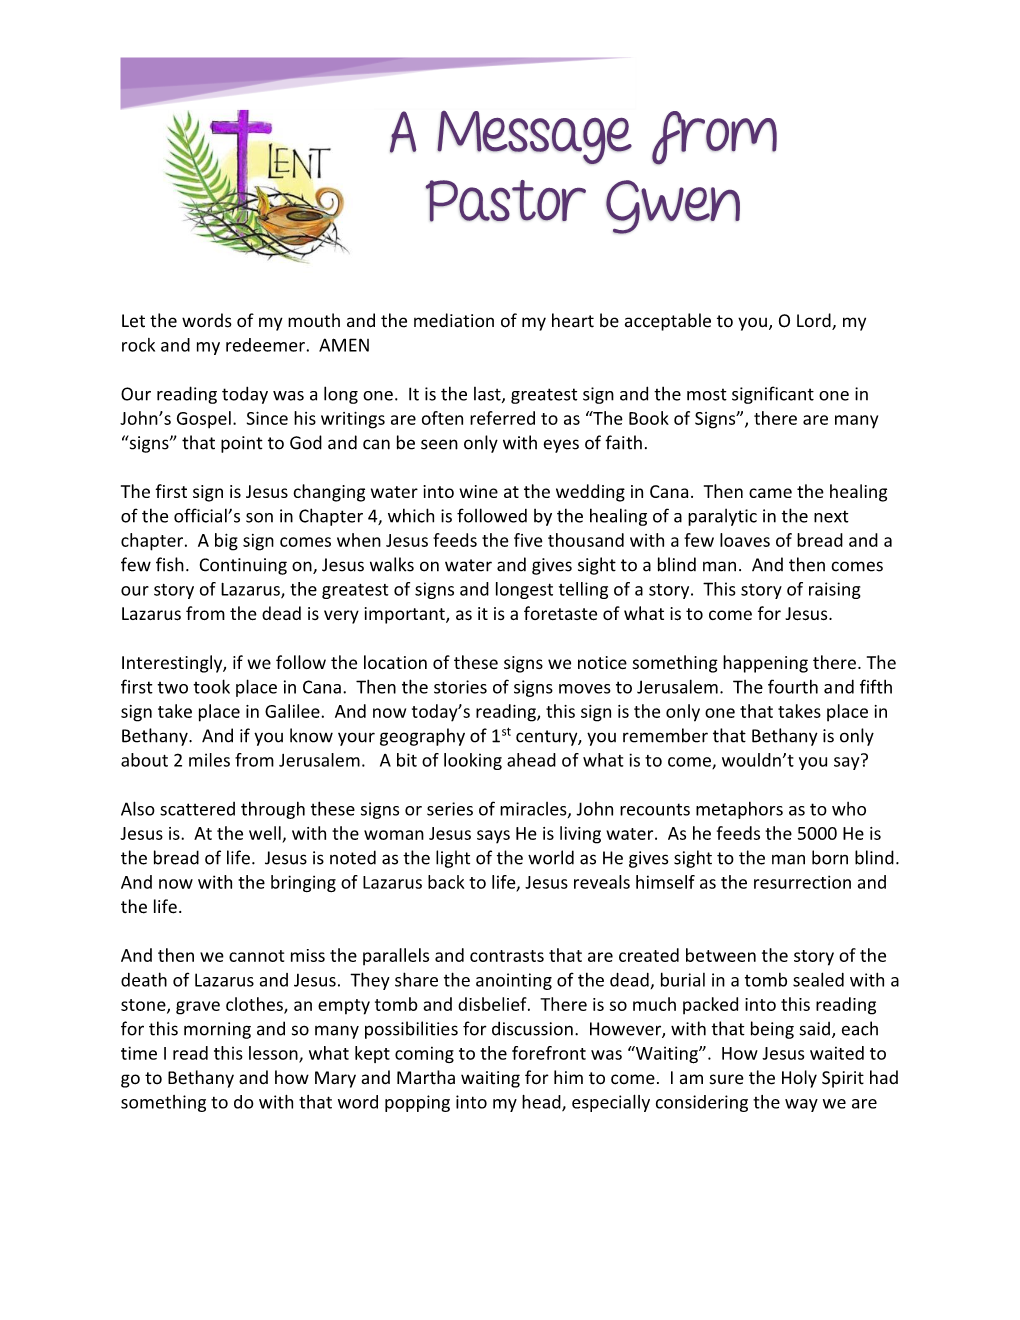 A Message from Pastor Gwen